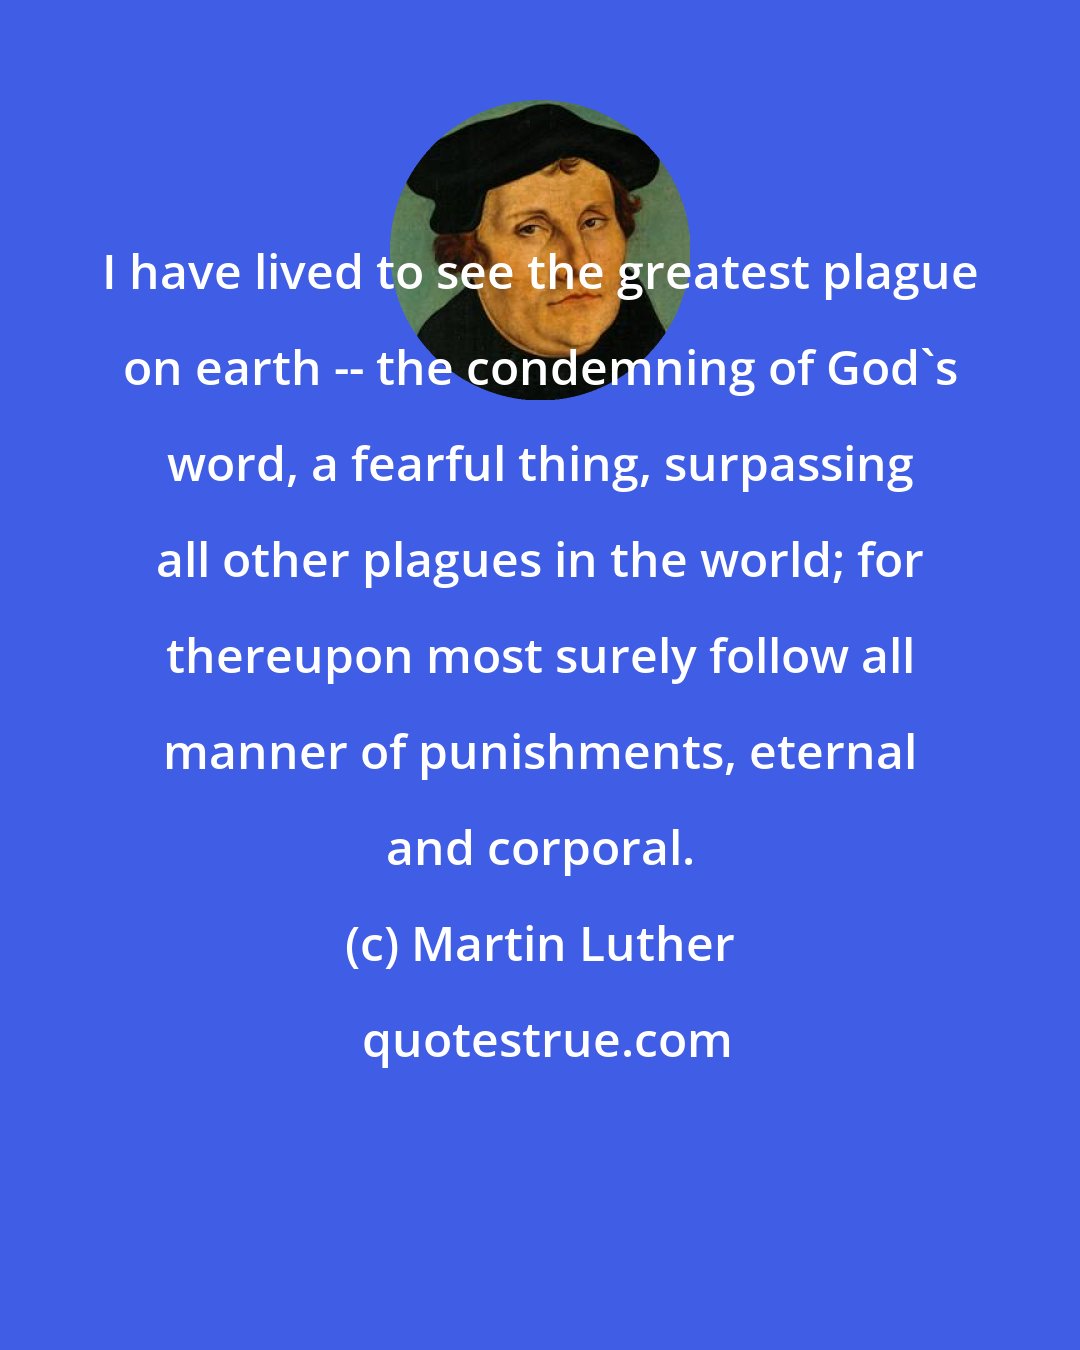 Martin Luther: I have lived to see the greatest plague on earth -- the condemning of God's word, a fearful thing, surpassing all other plagues in the world; for thereupon most surely follow all manner of punishments, eternal and corporal.